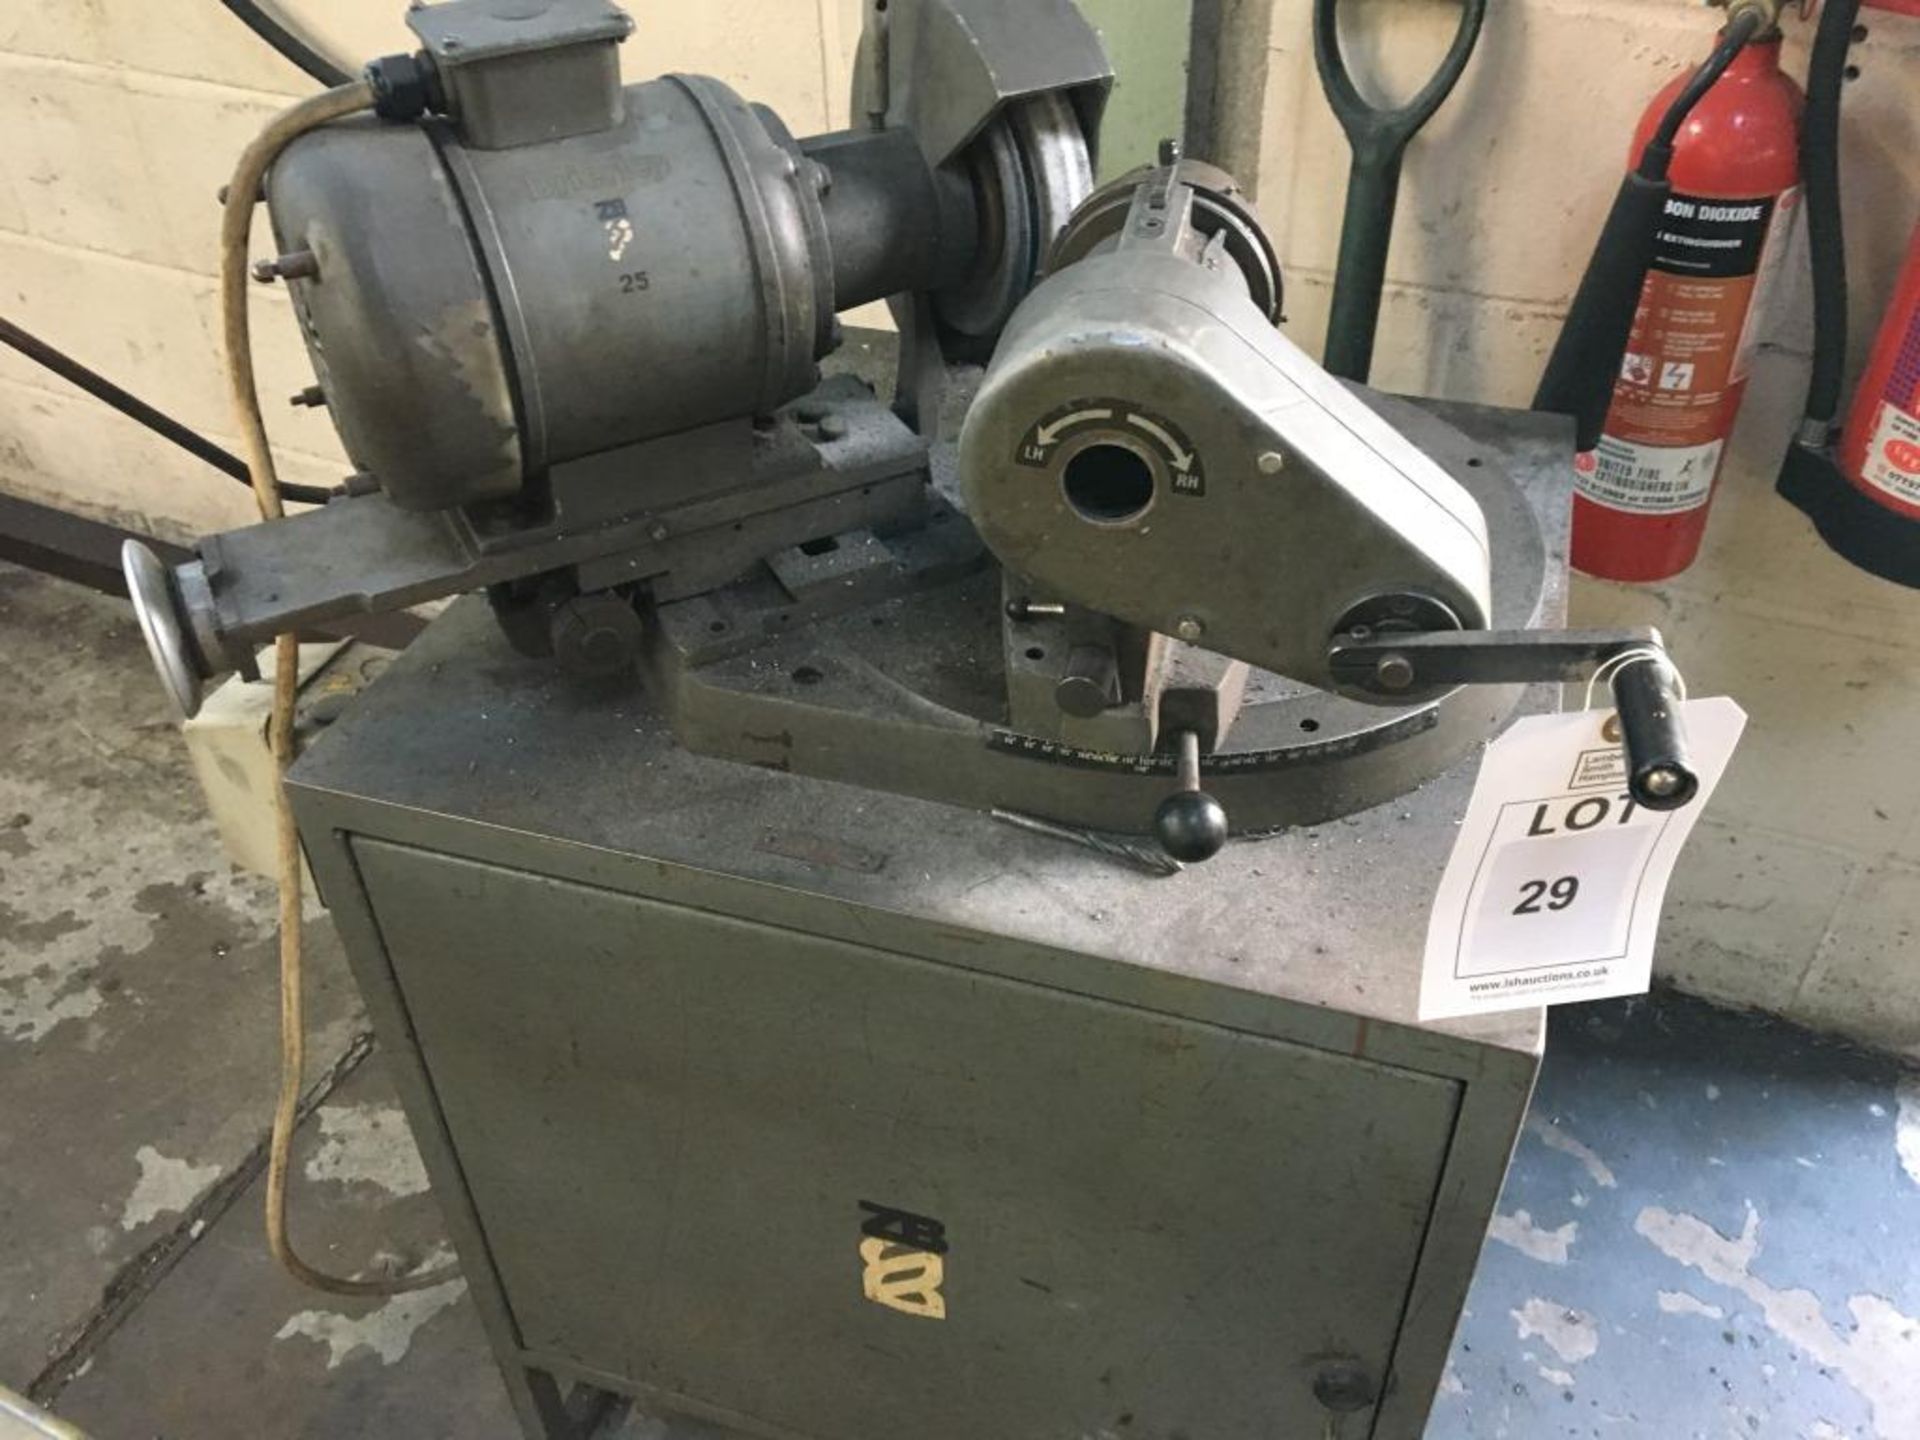 Brierley ZB25 tool grinder. A work Method Statement and Risk Assessment must be reviewed and